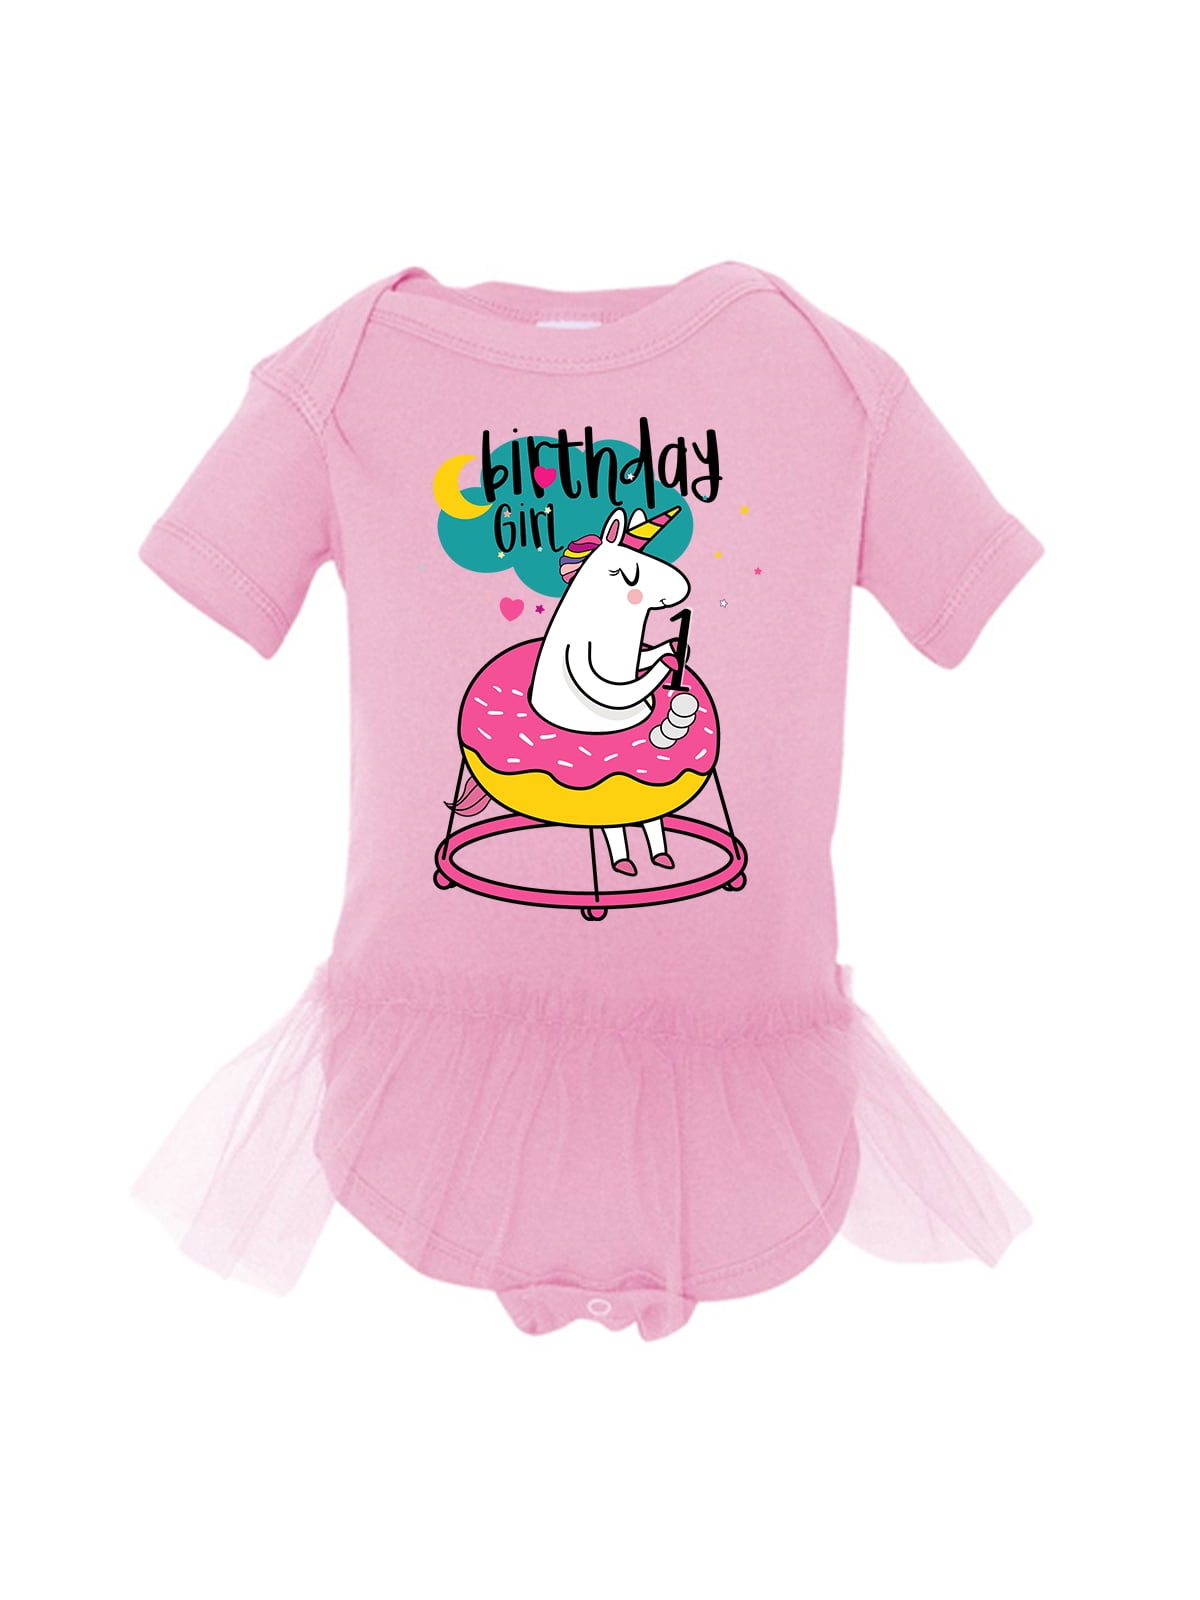 1 year old birthday clothes girl